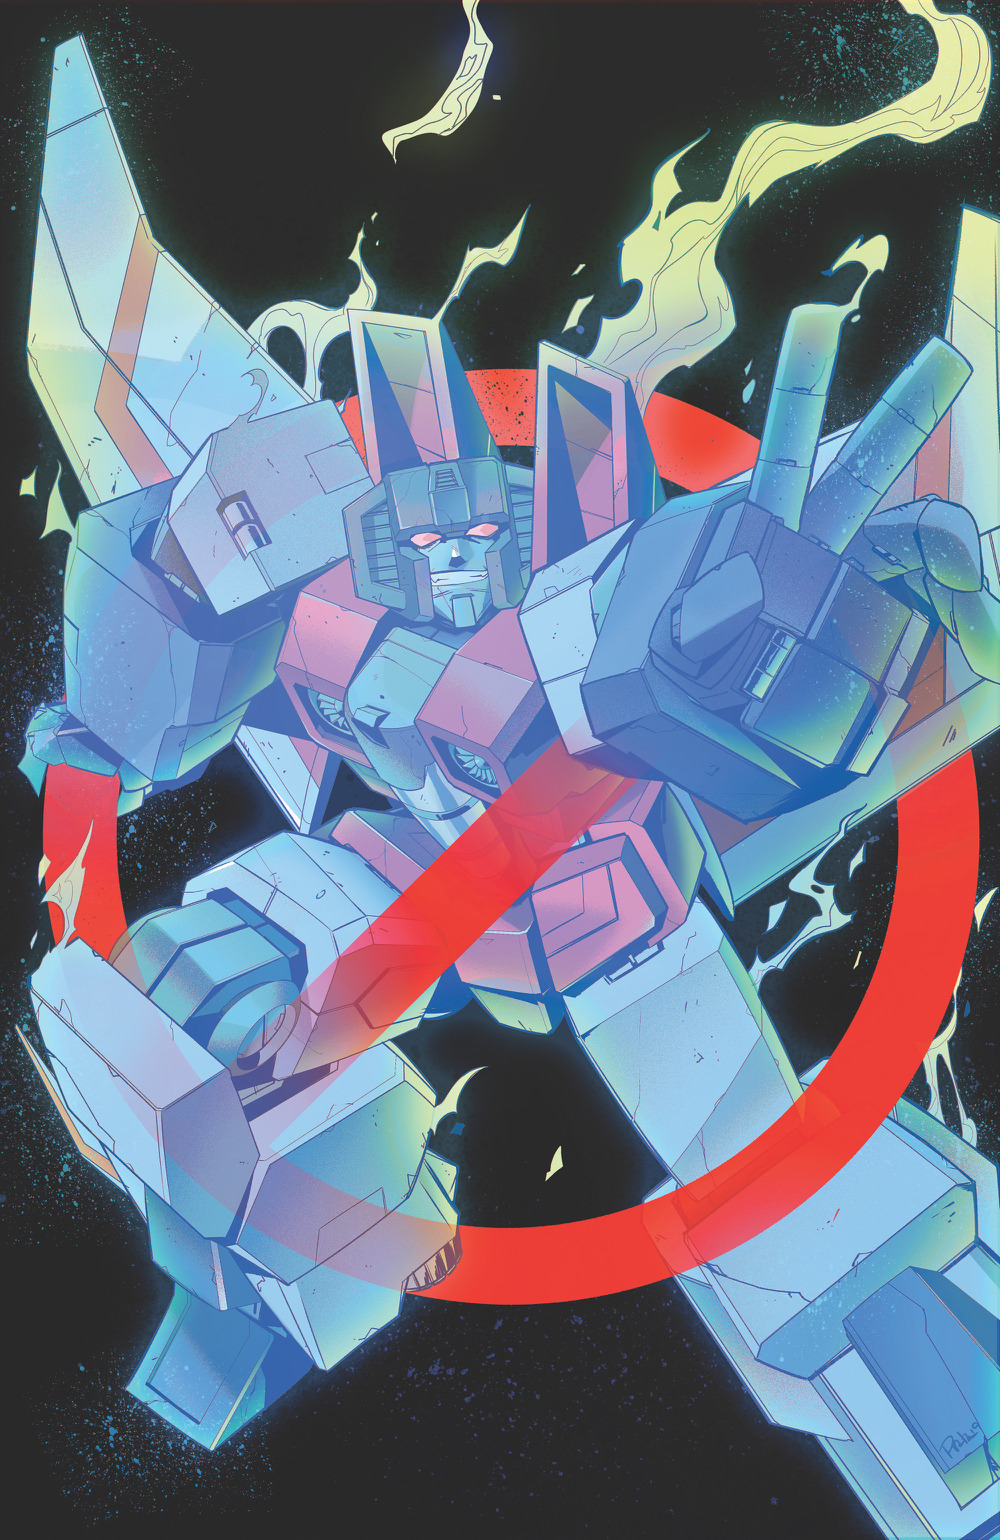 scans_daily | First Sight of the TransformersGhostbusters comic